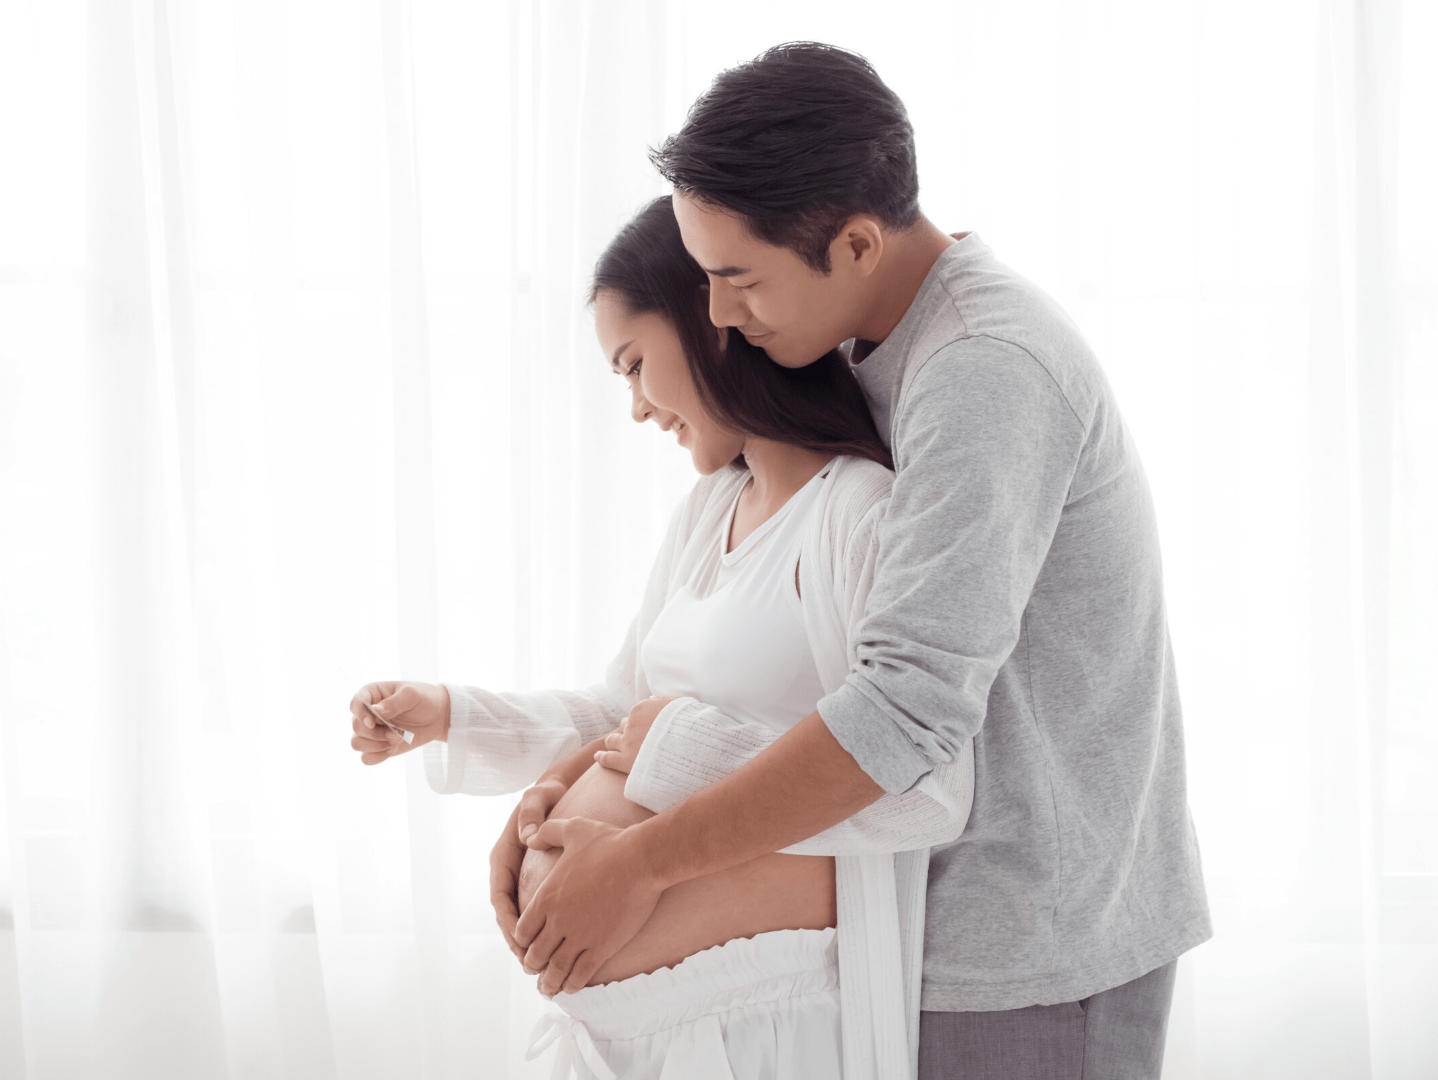 Give birth with confidence - join our Couples Birth Preparation course